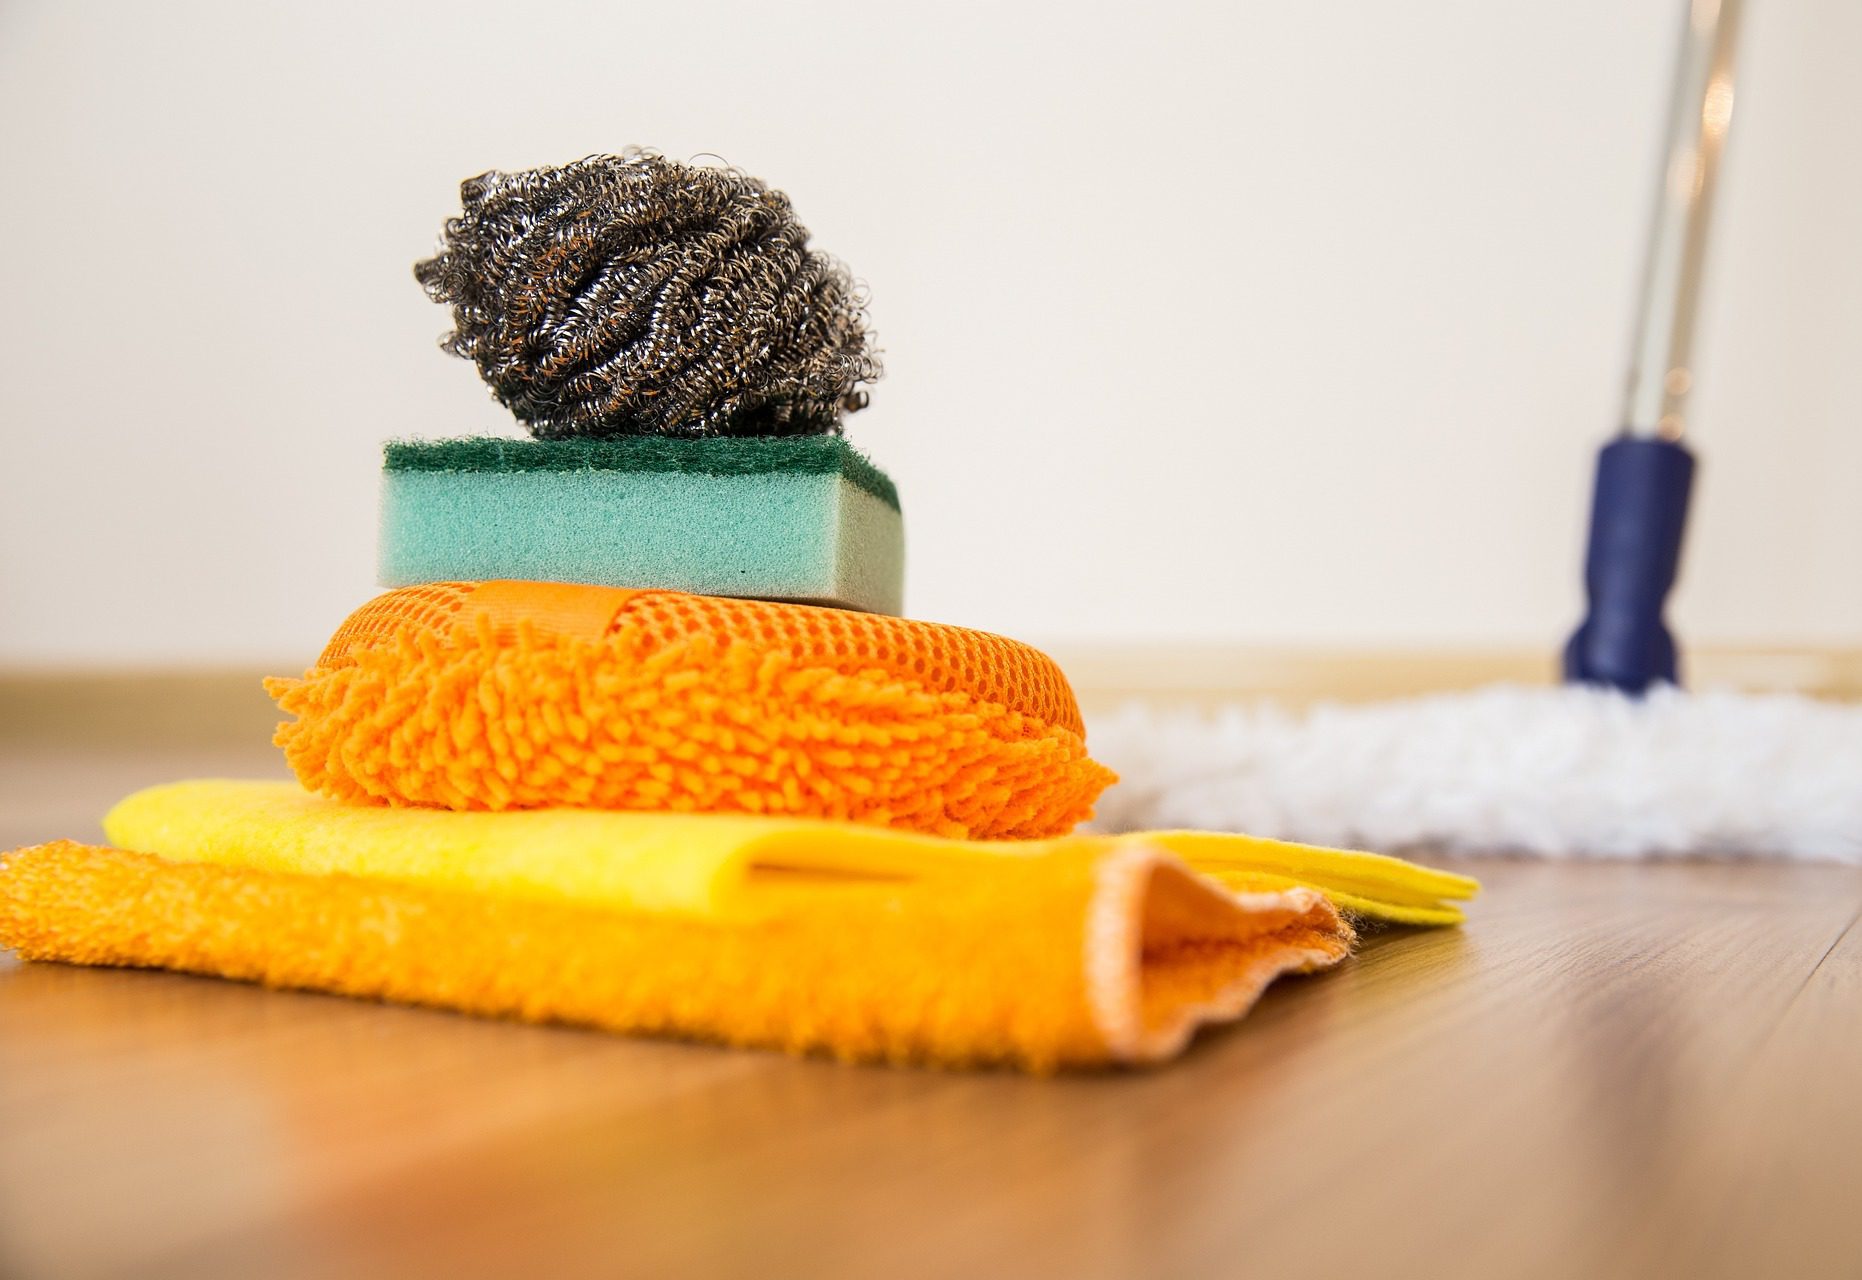 How do You Keep on Top of Household Cleaning